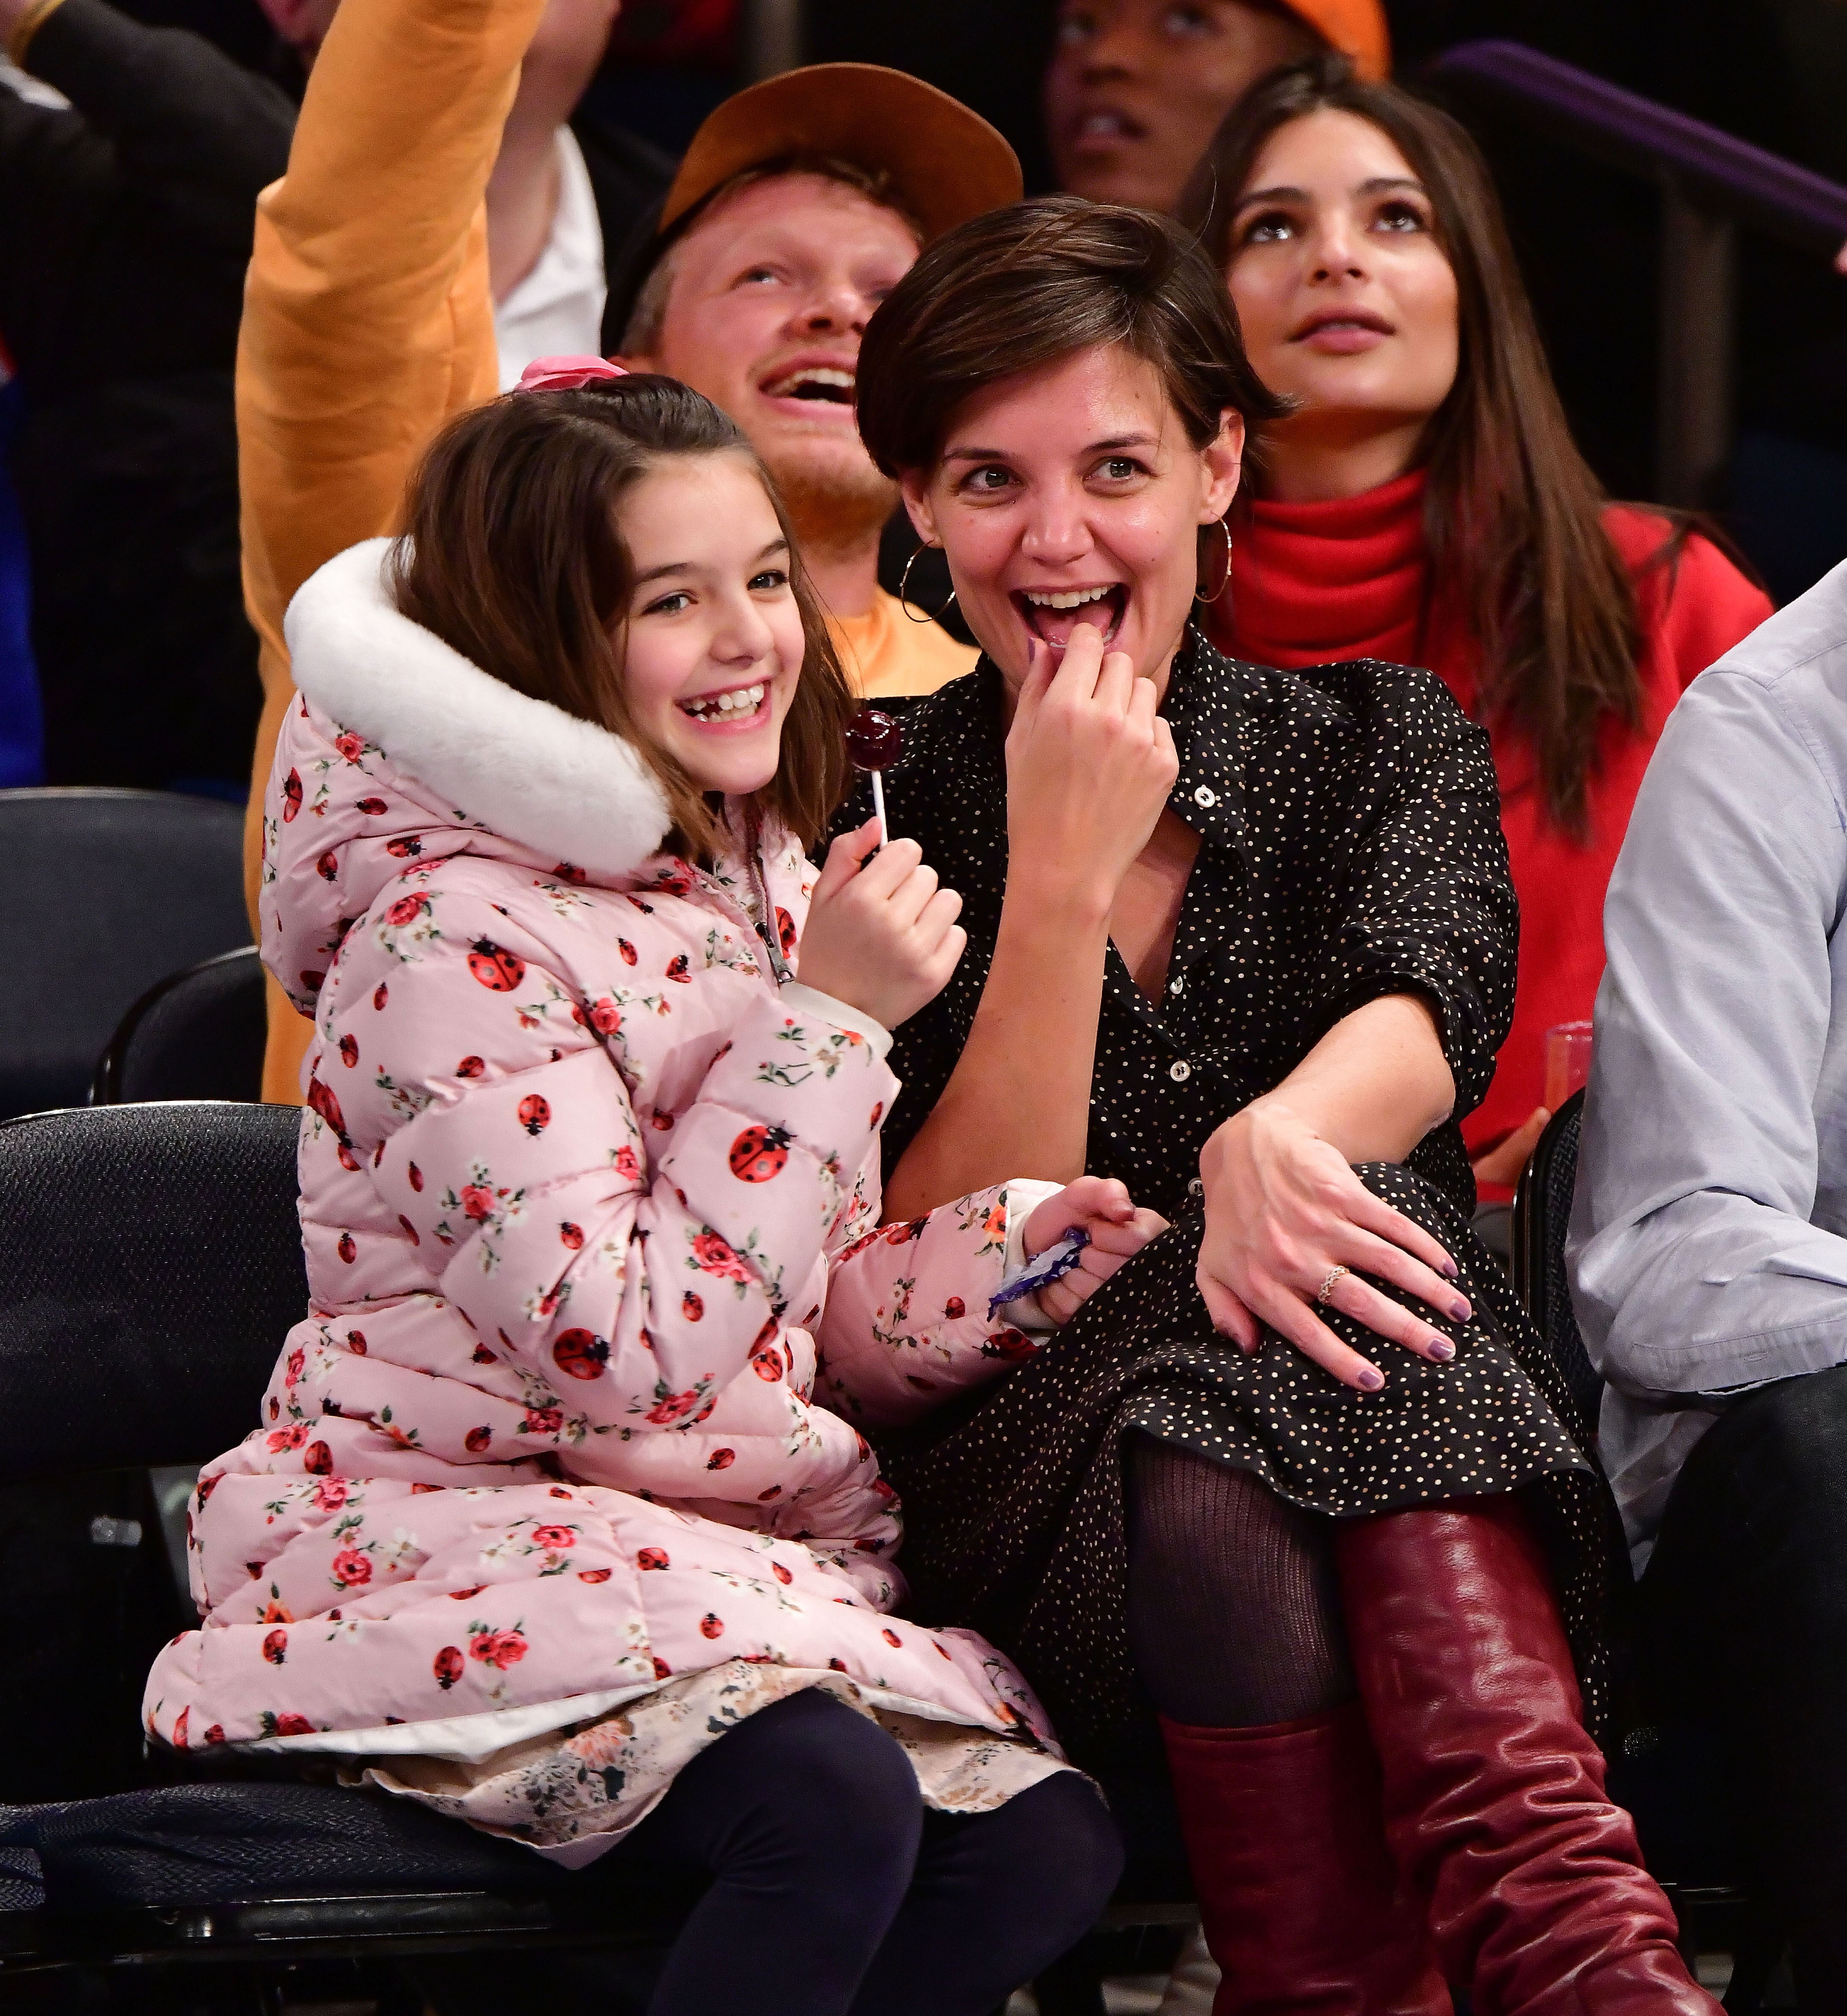 Suri Cruise and Katie Holmes attend a basketball game at Madison Square Garden on December 16, 2017 in New York City. | Source: Getty Images